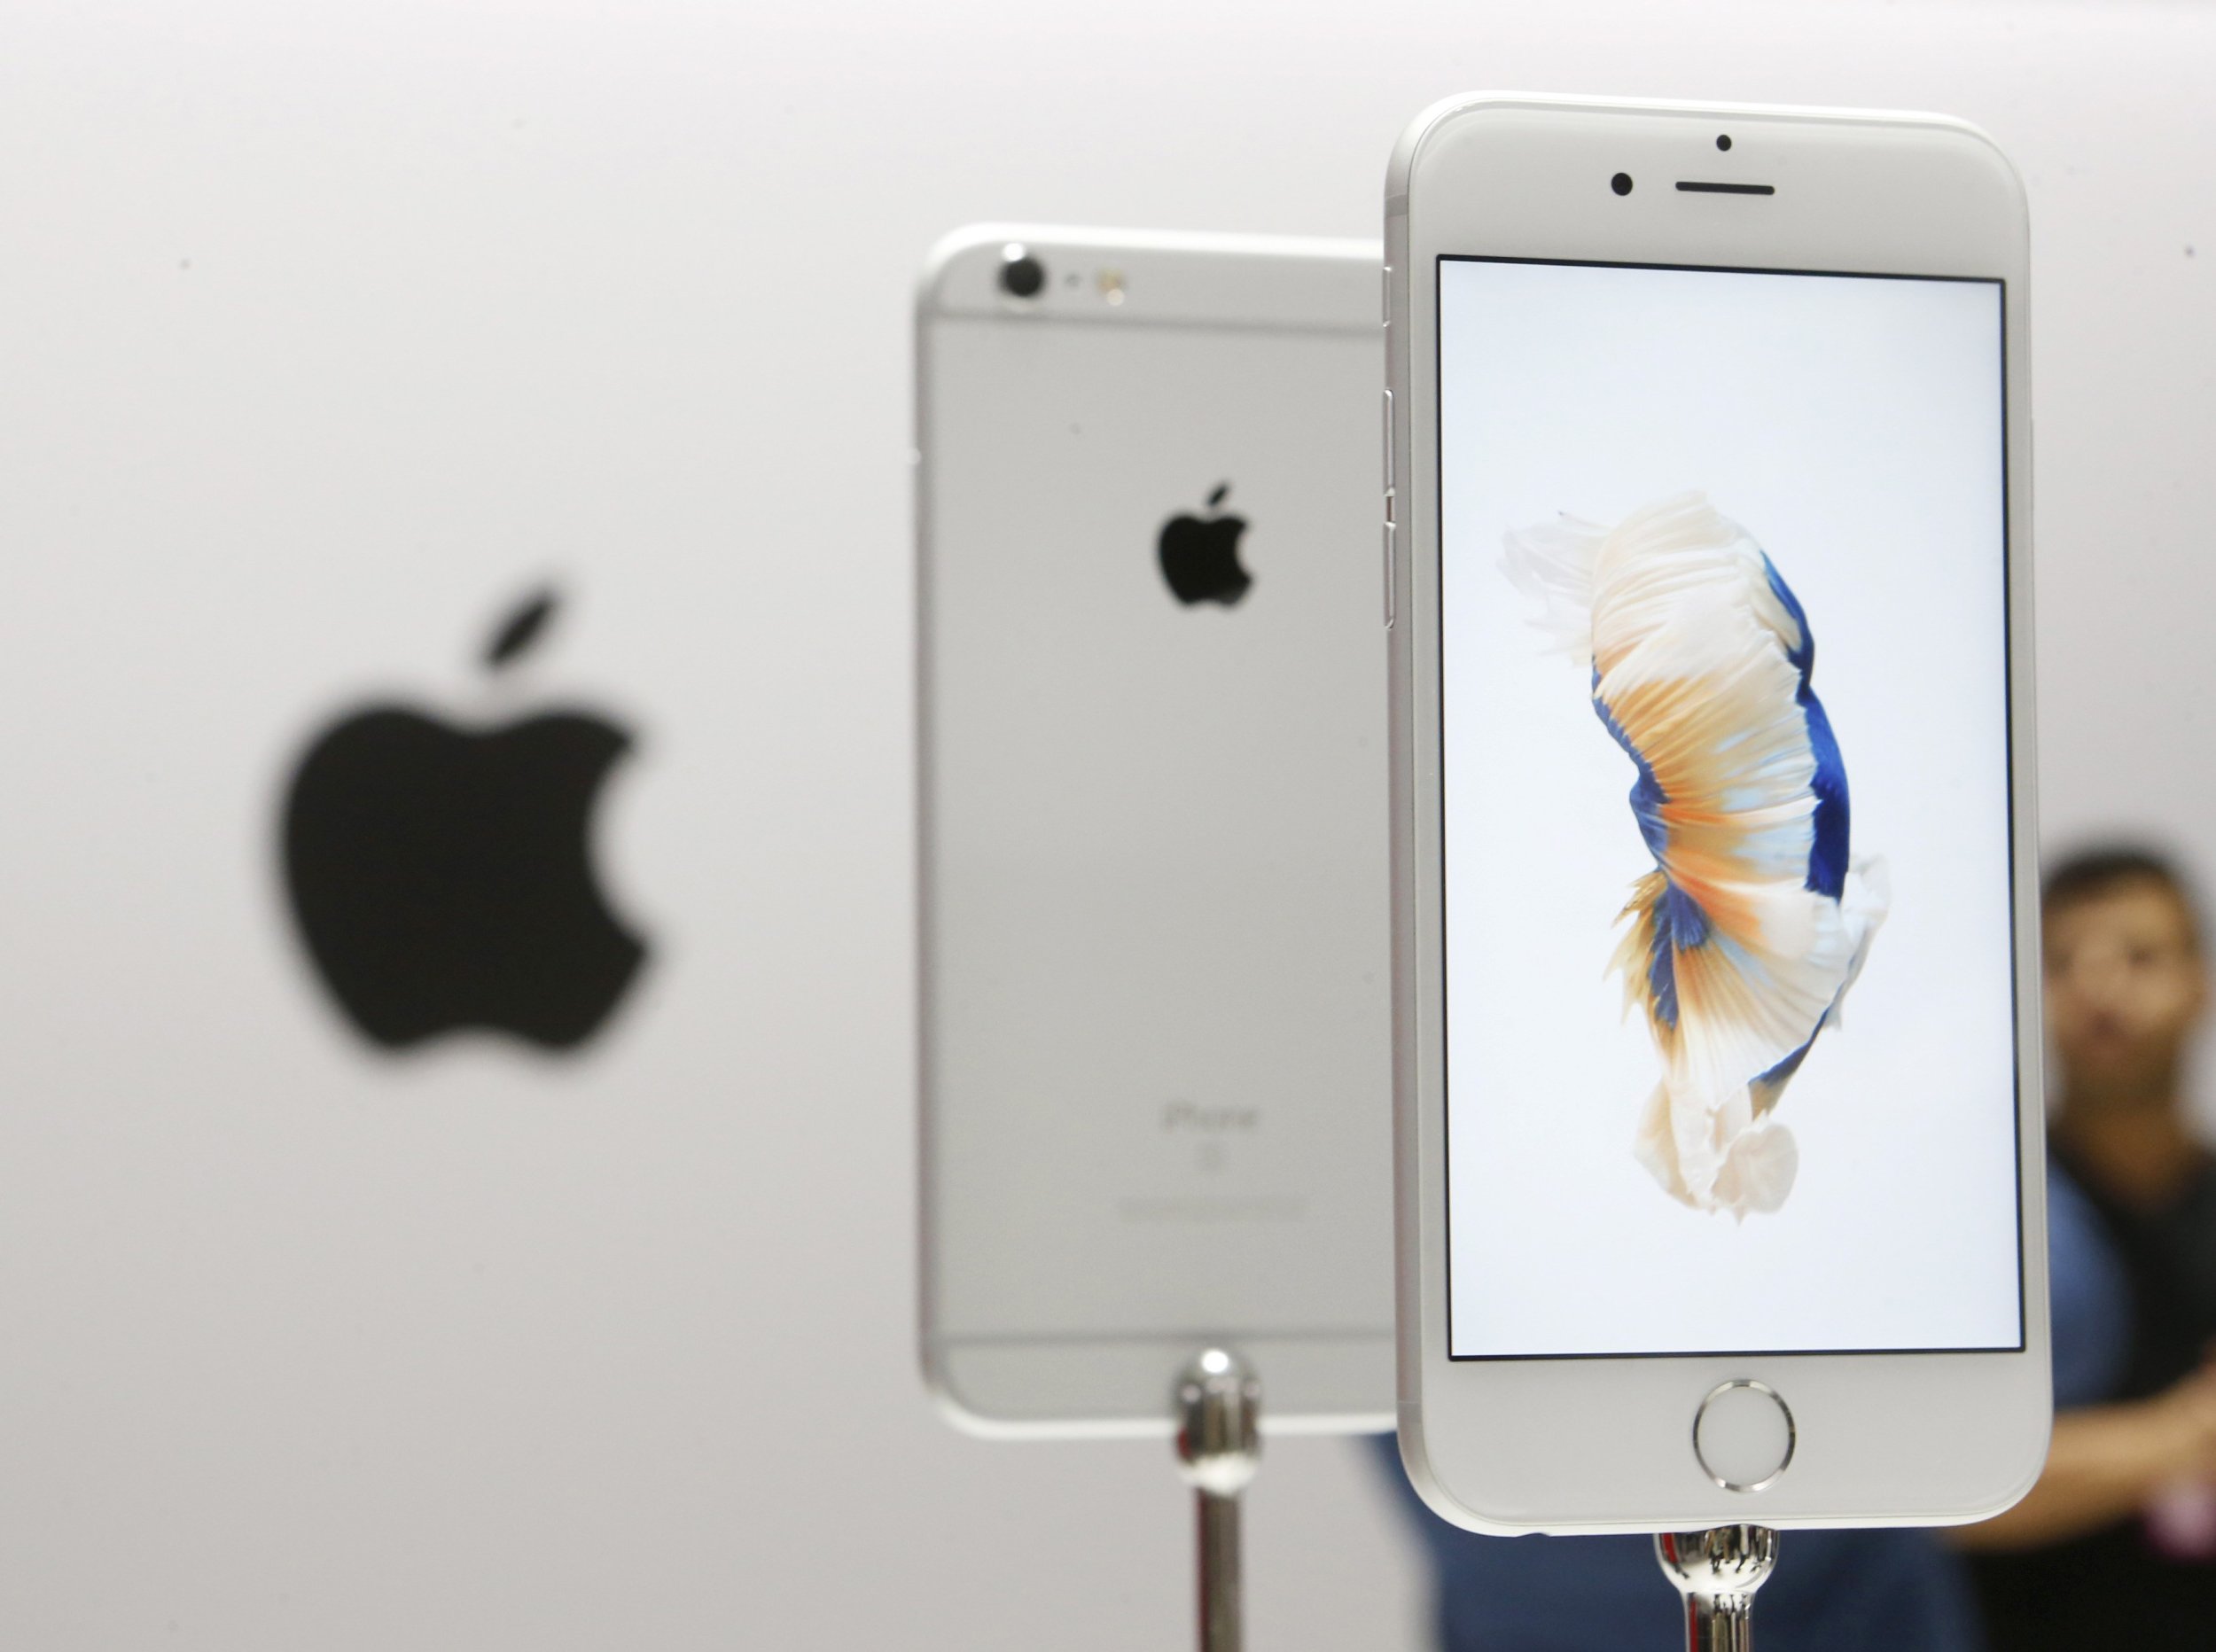 Apple iPhone 6S and 6S Plus review roundup: stronger, faster, heavier, iPhone